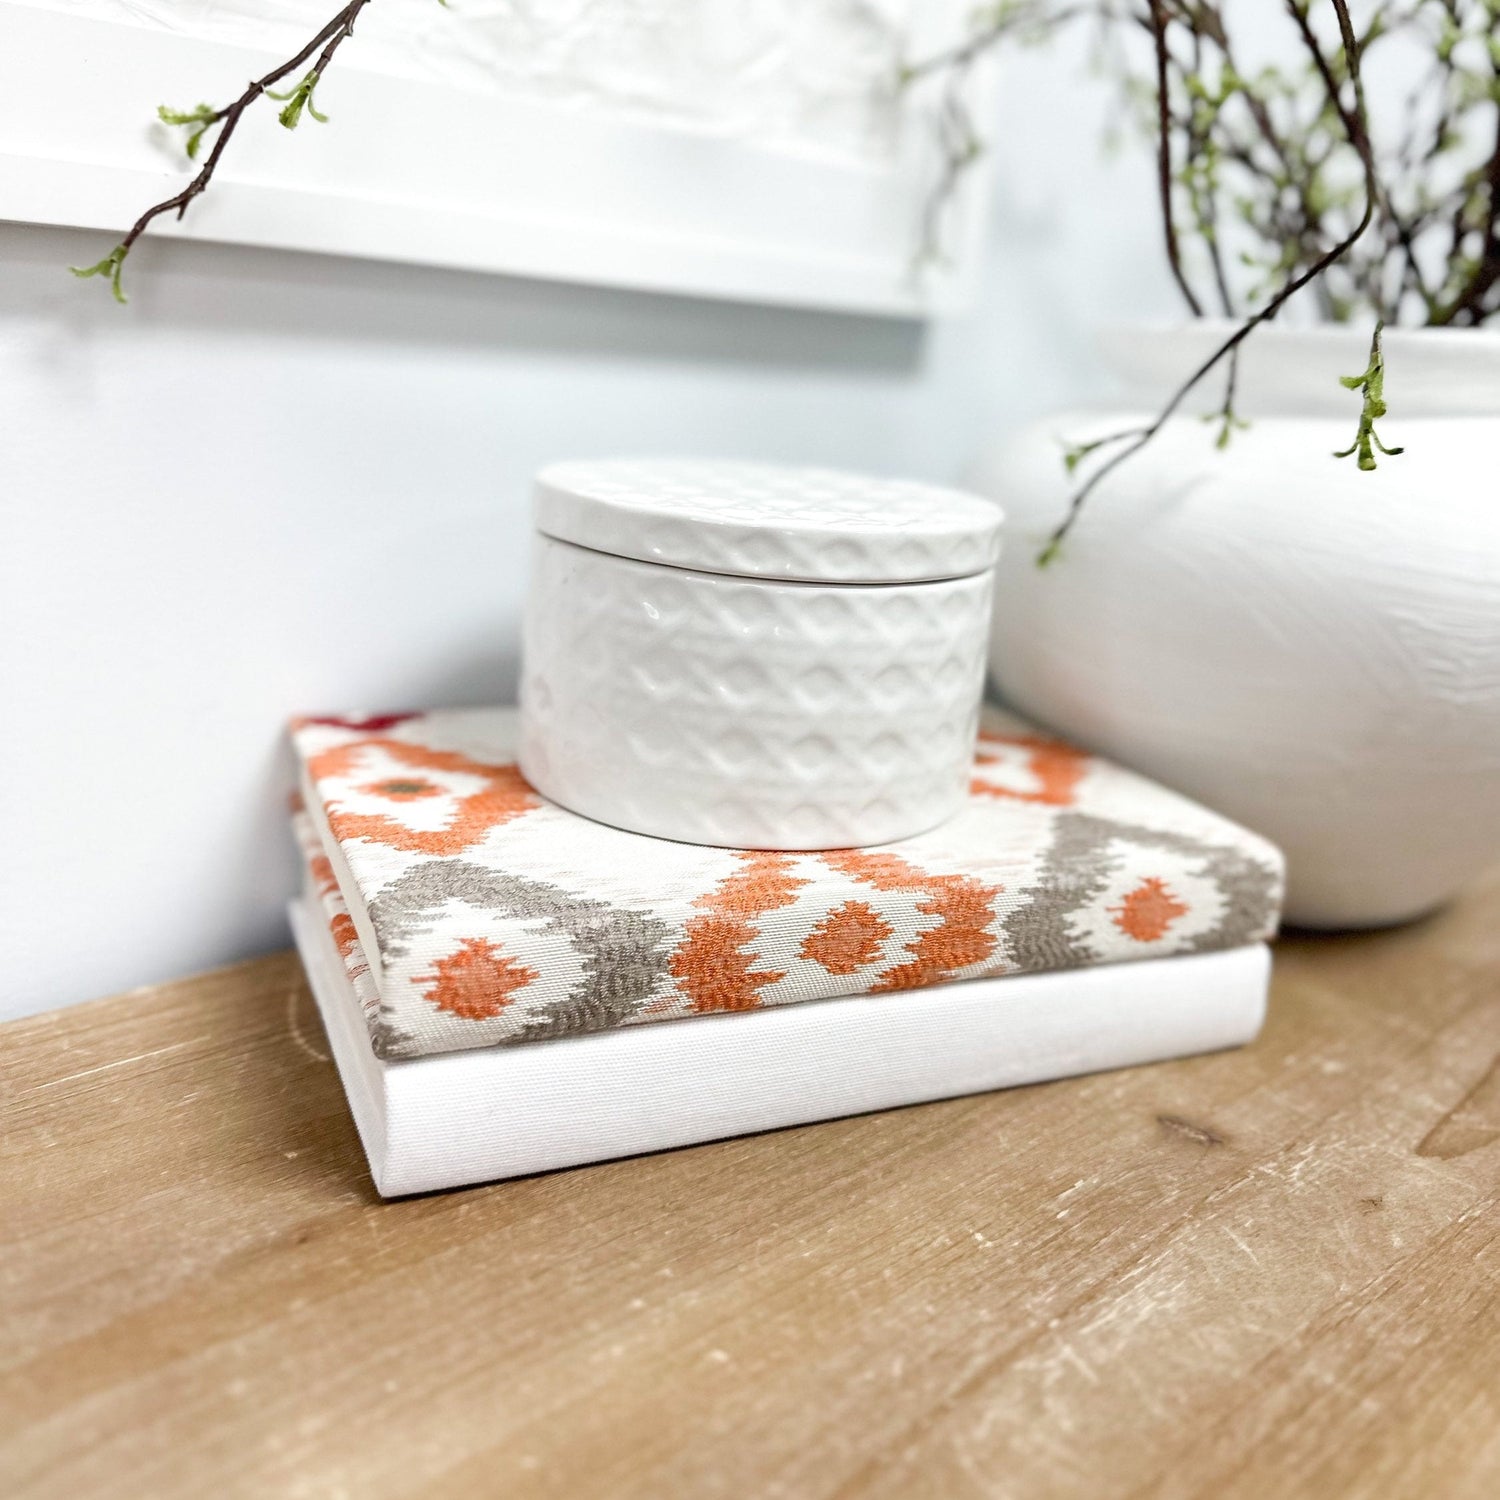 Fabric Covered Books for Home Decor